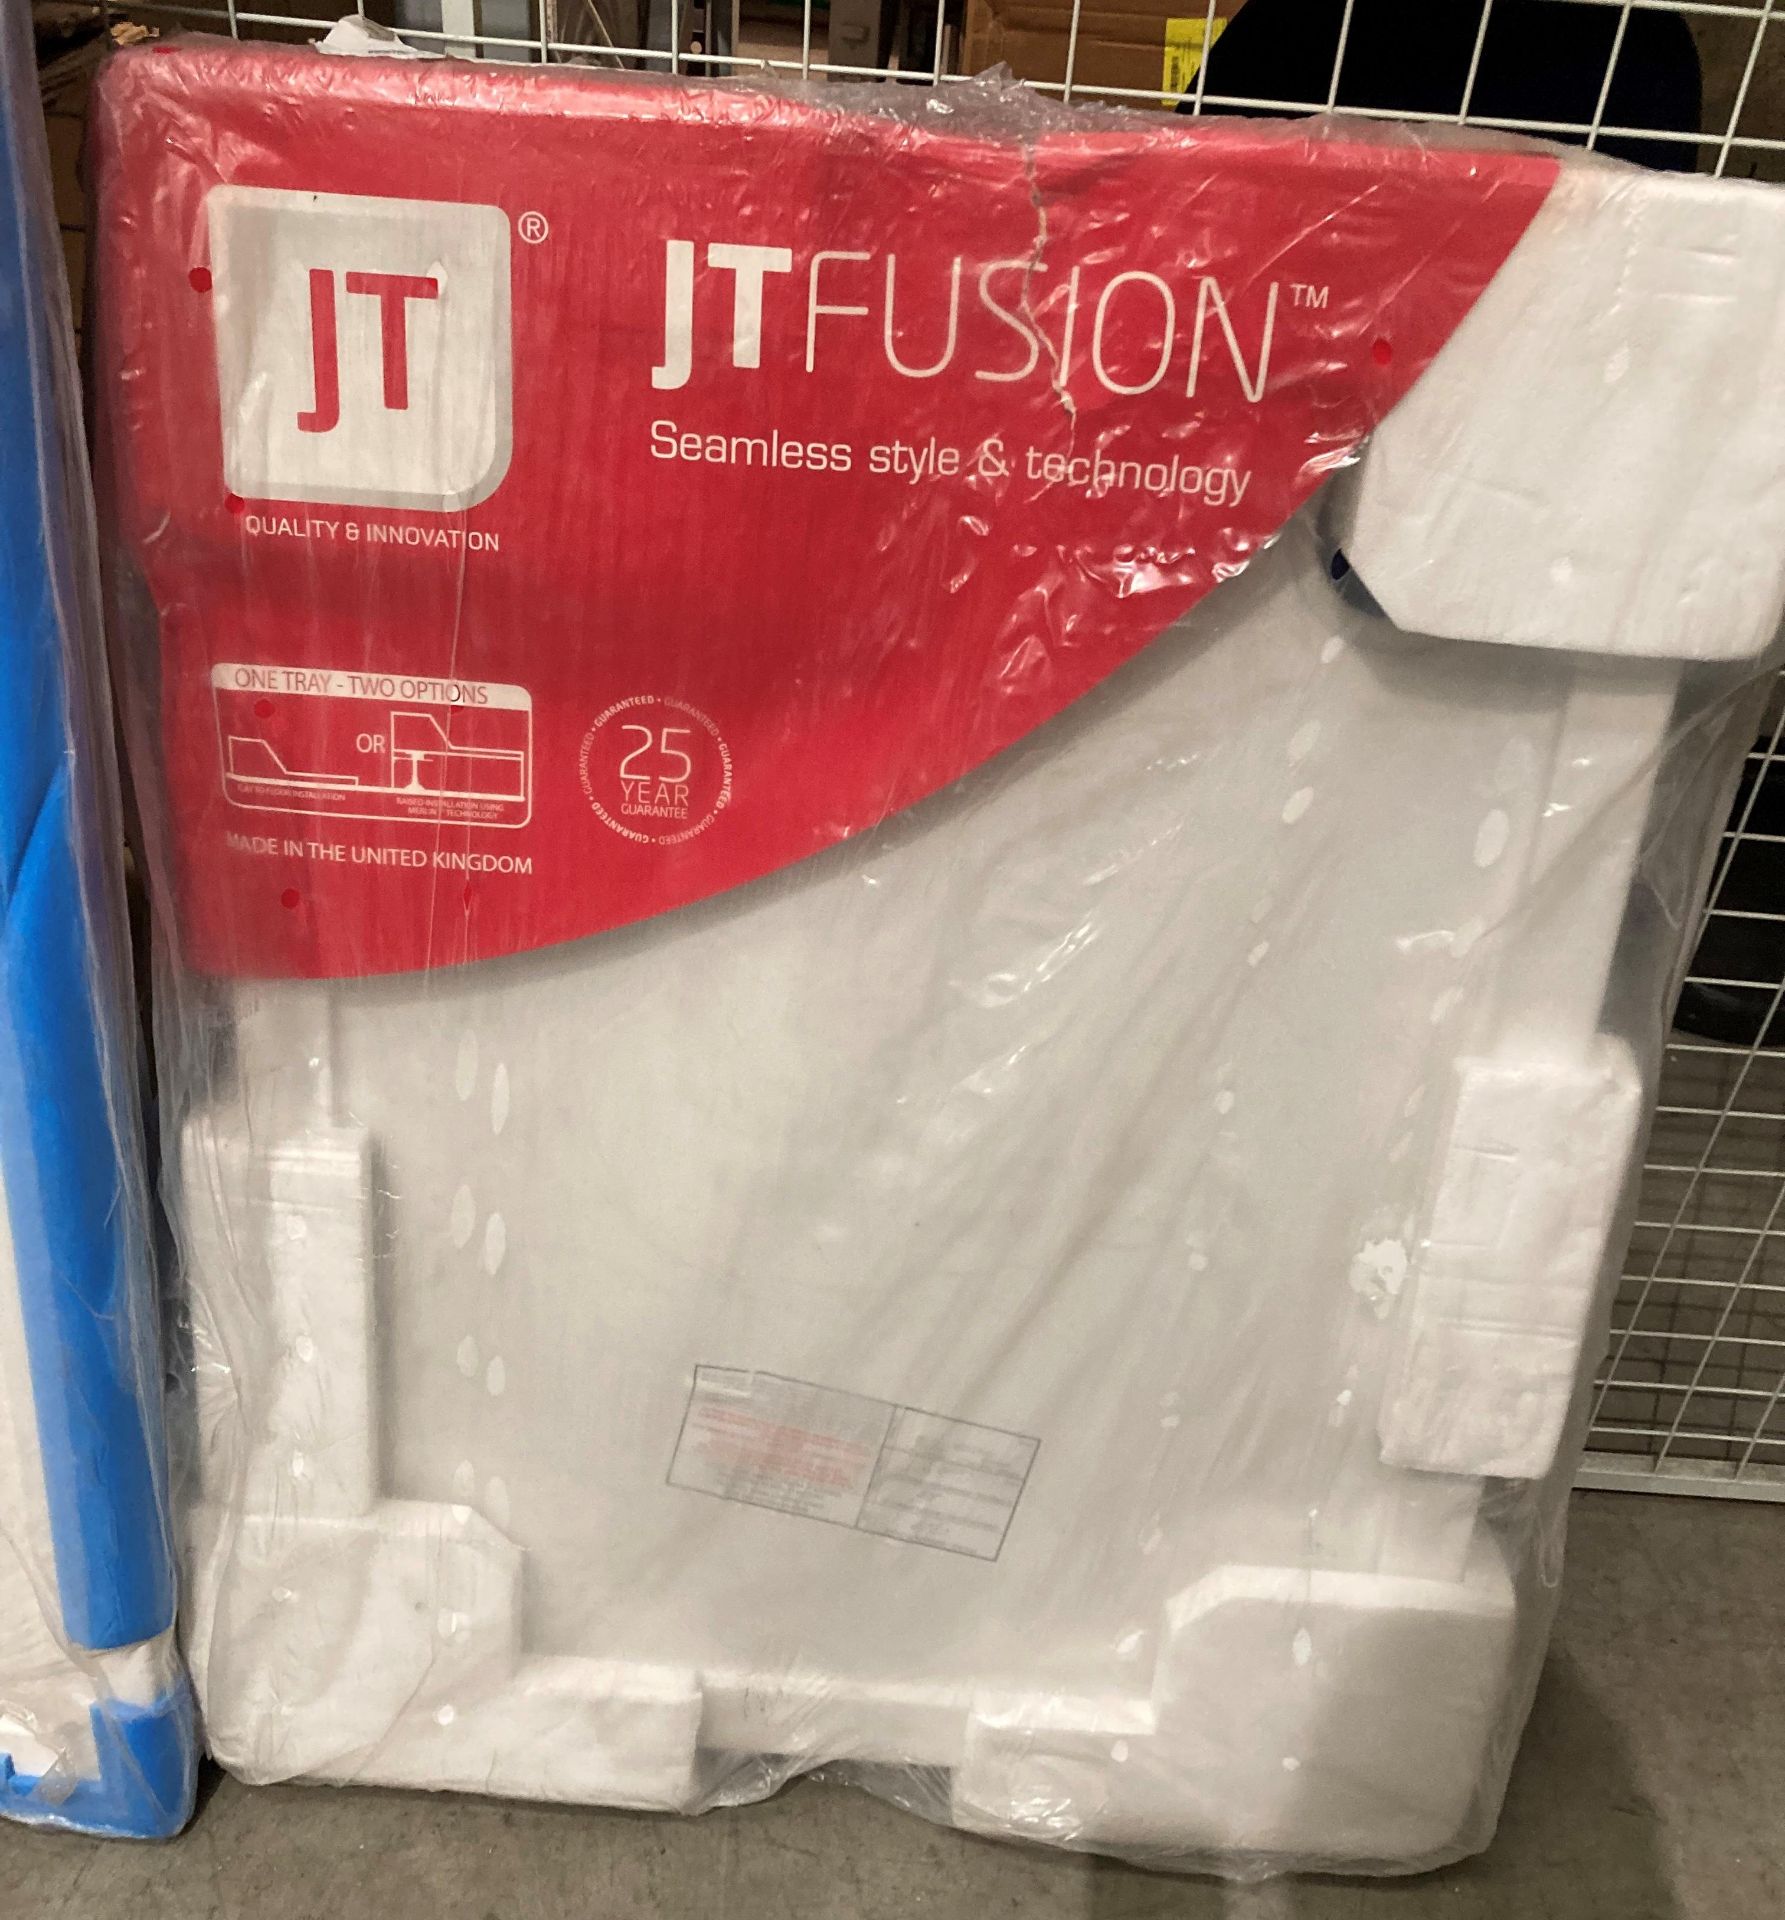 JTFusion 900x 700mm square shower tray (saleroom location: RB)